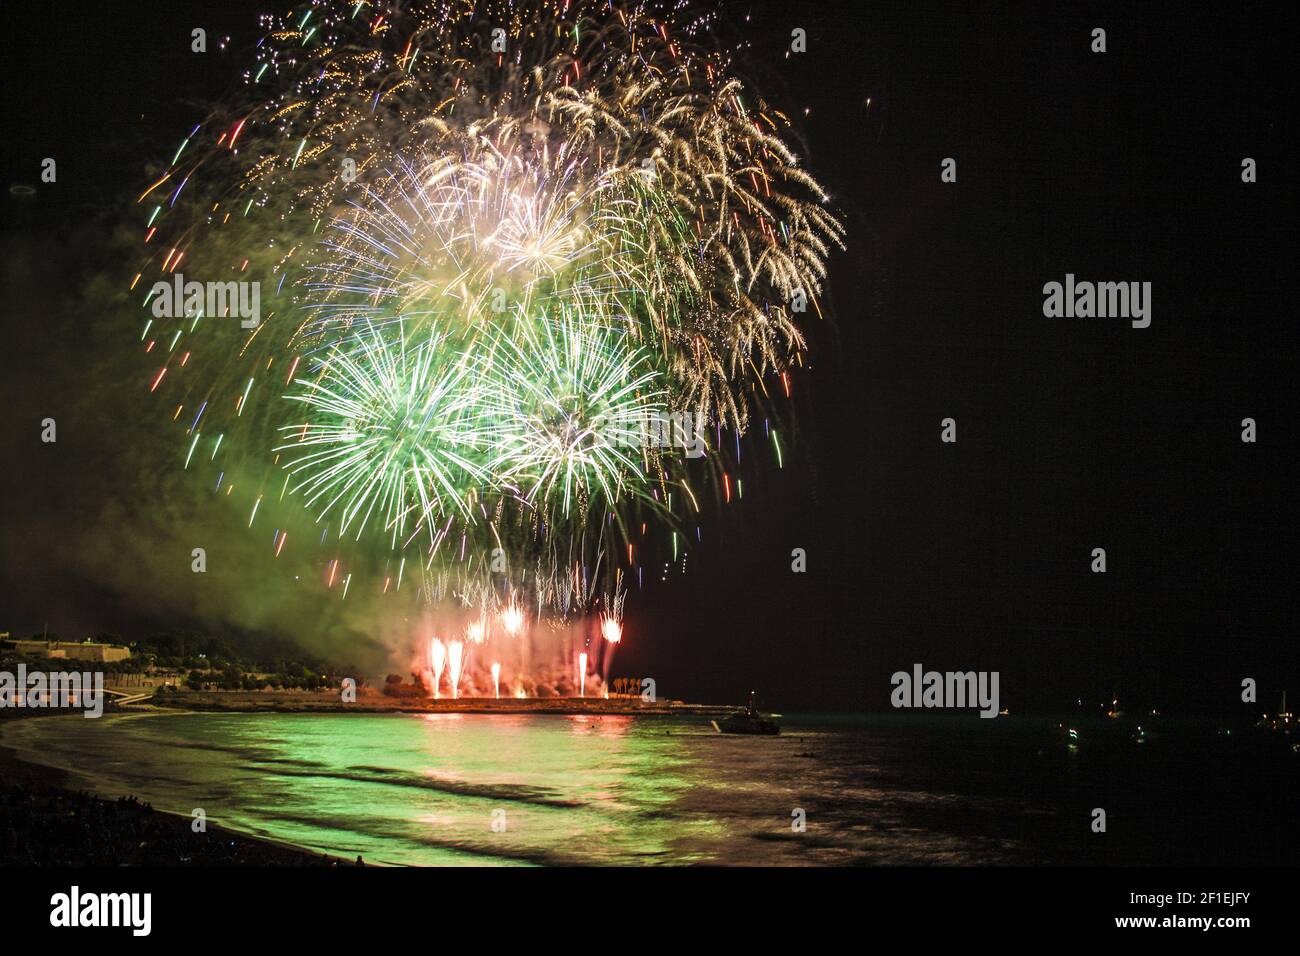 Fireworks display over sea with reflections Stock Photo